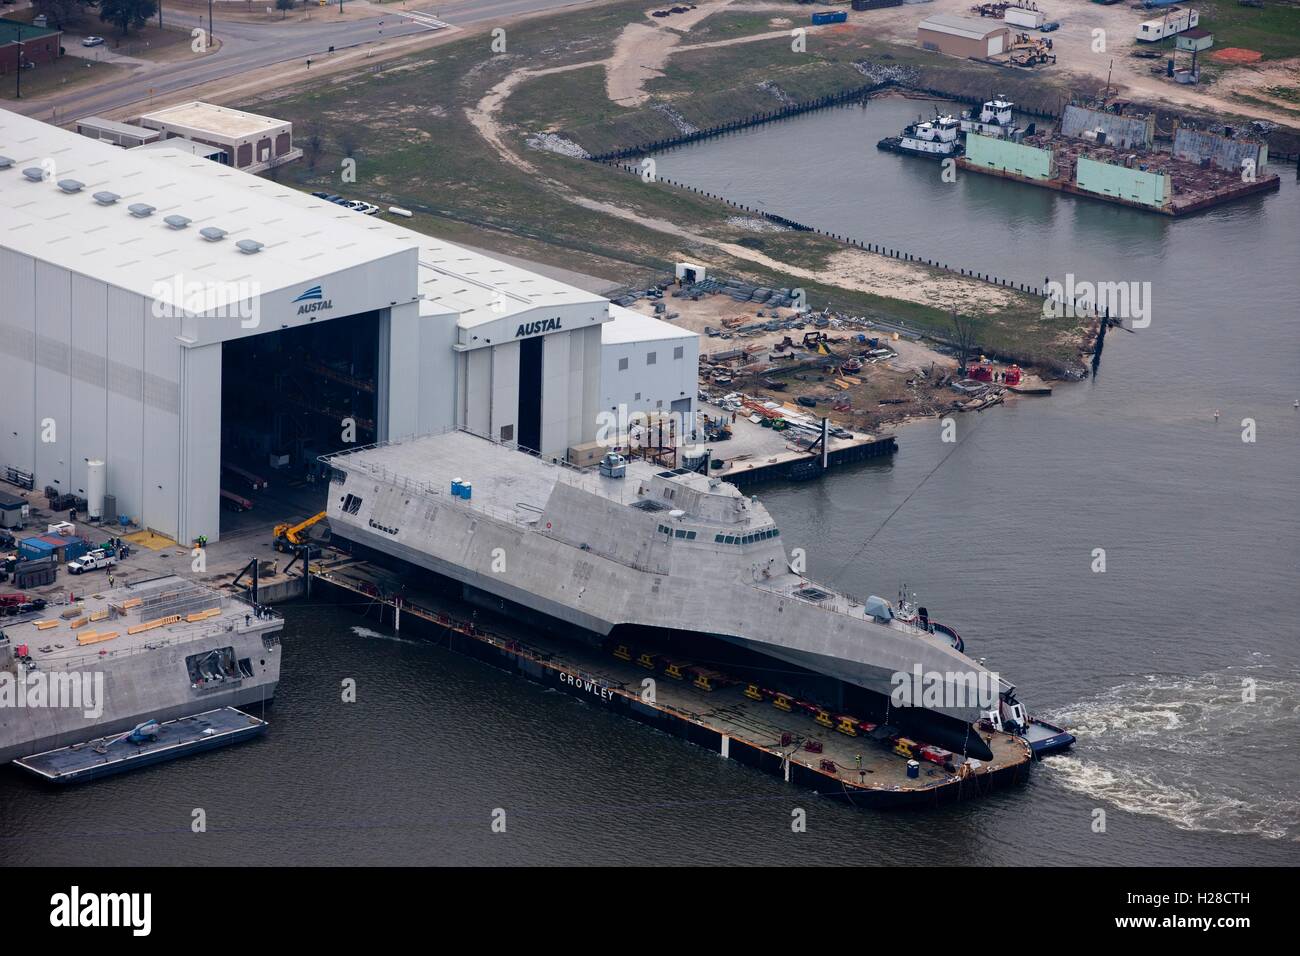 An aerial view of the new Navy Independence-class littoral combat ship USS Gabrielle Giffords during its launch sequence at the Austal USA shipyard February 24, 2015 in Mobile, Alabama. Stock Photo